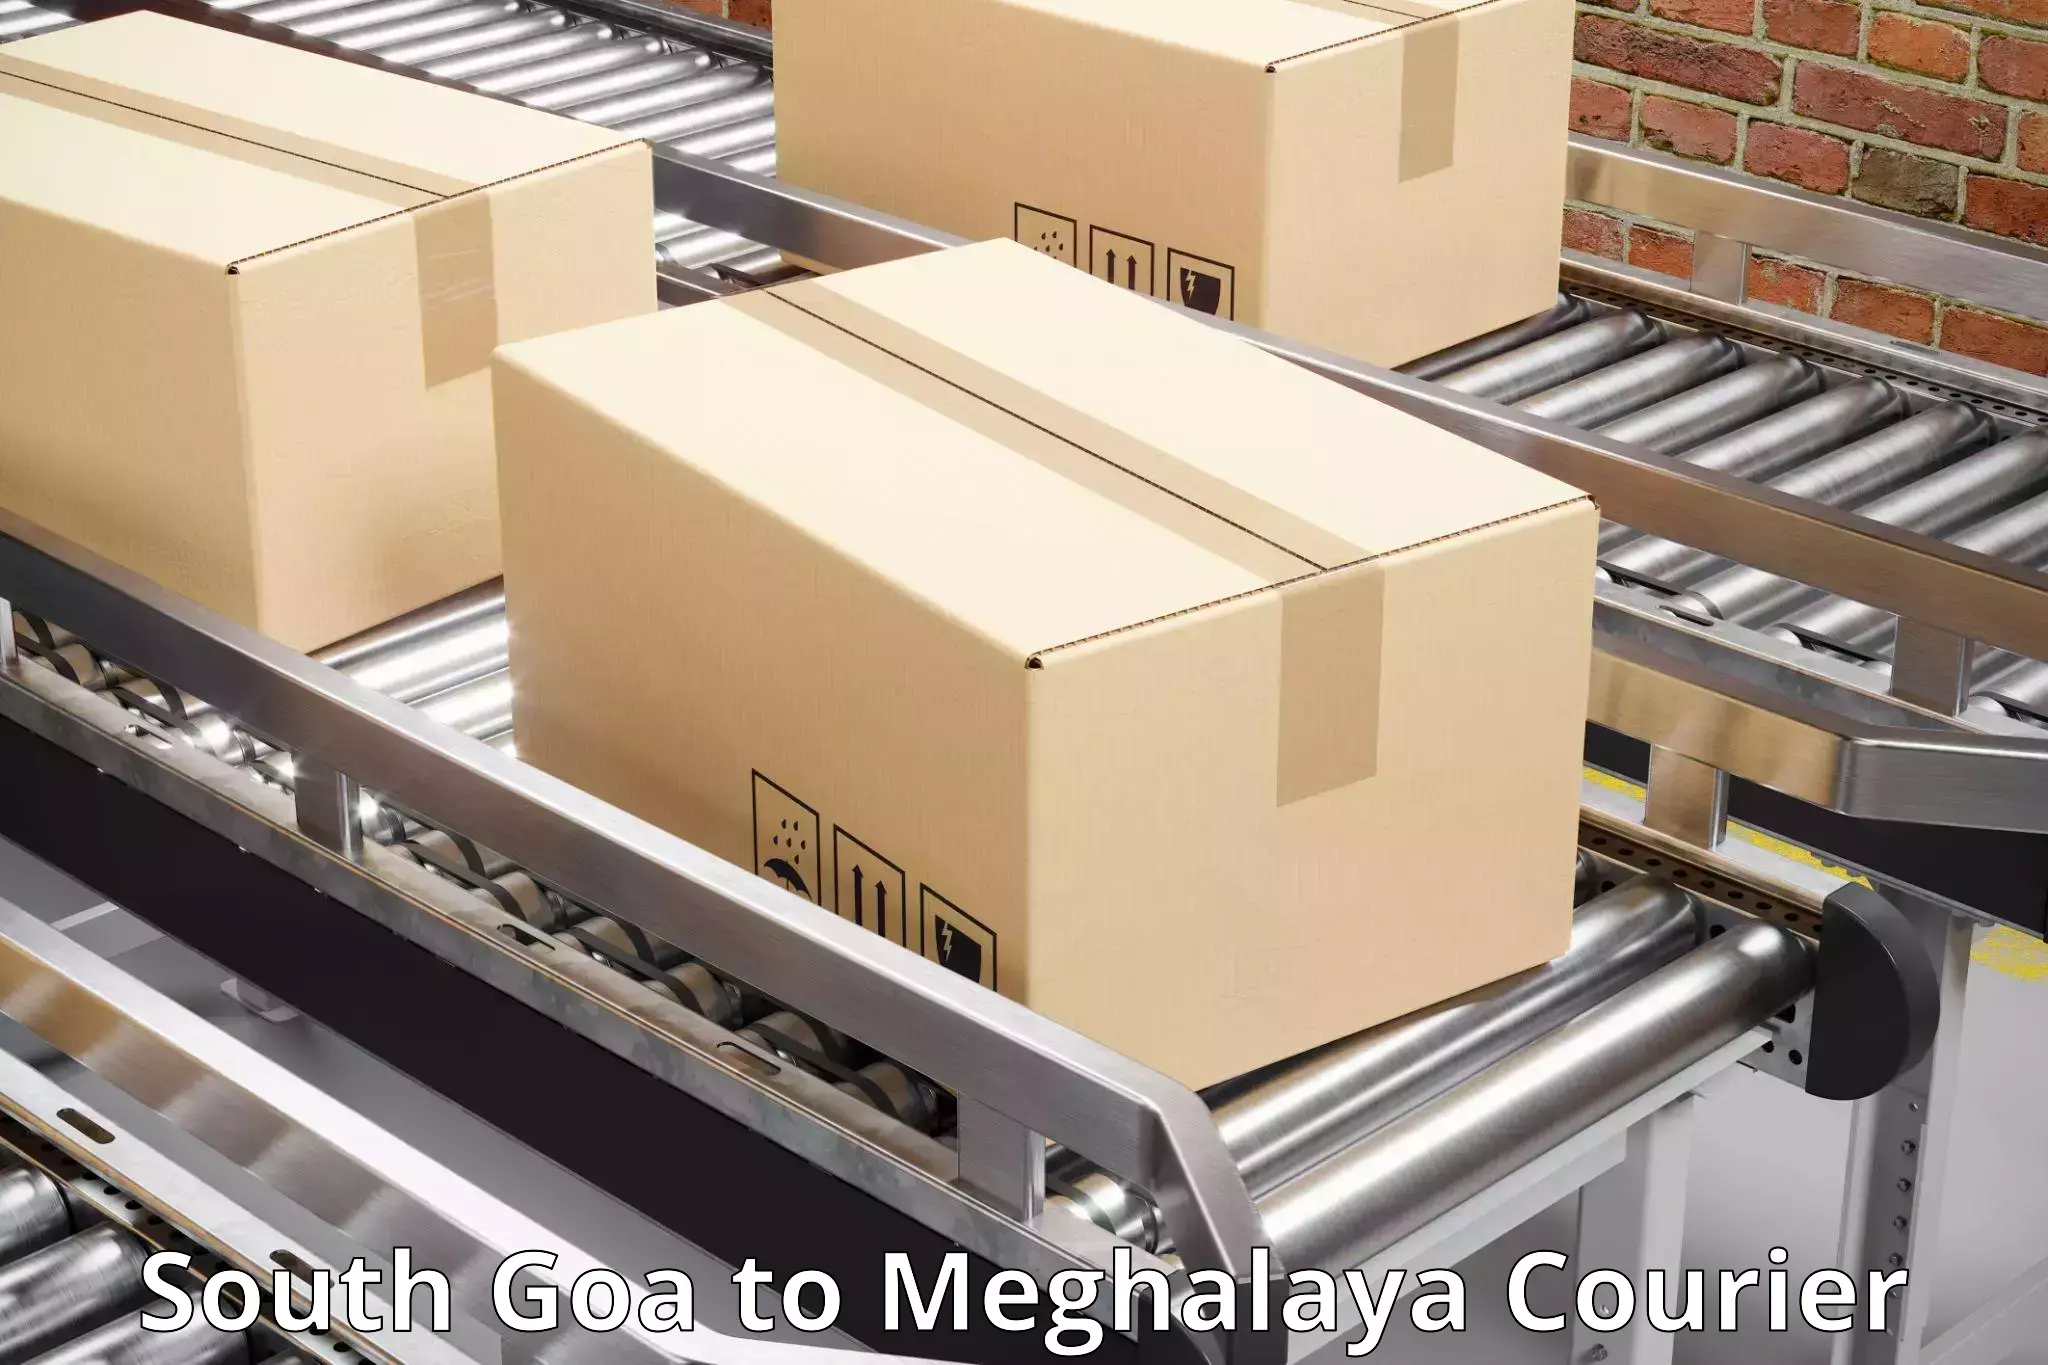 Cargo delivery service South Goa to Jaintia Hills